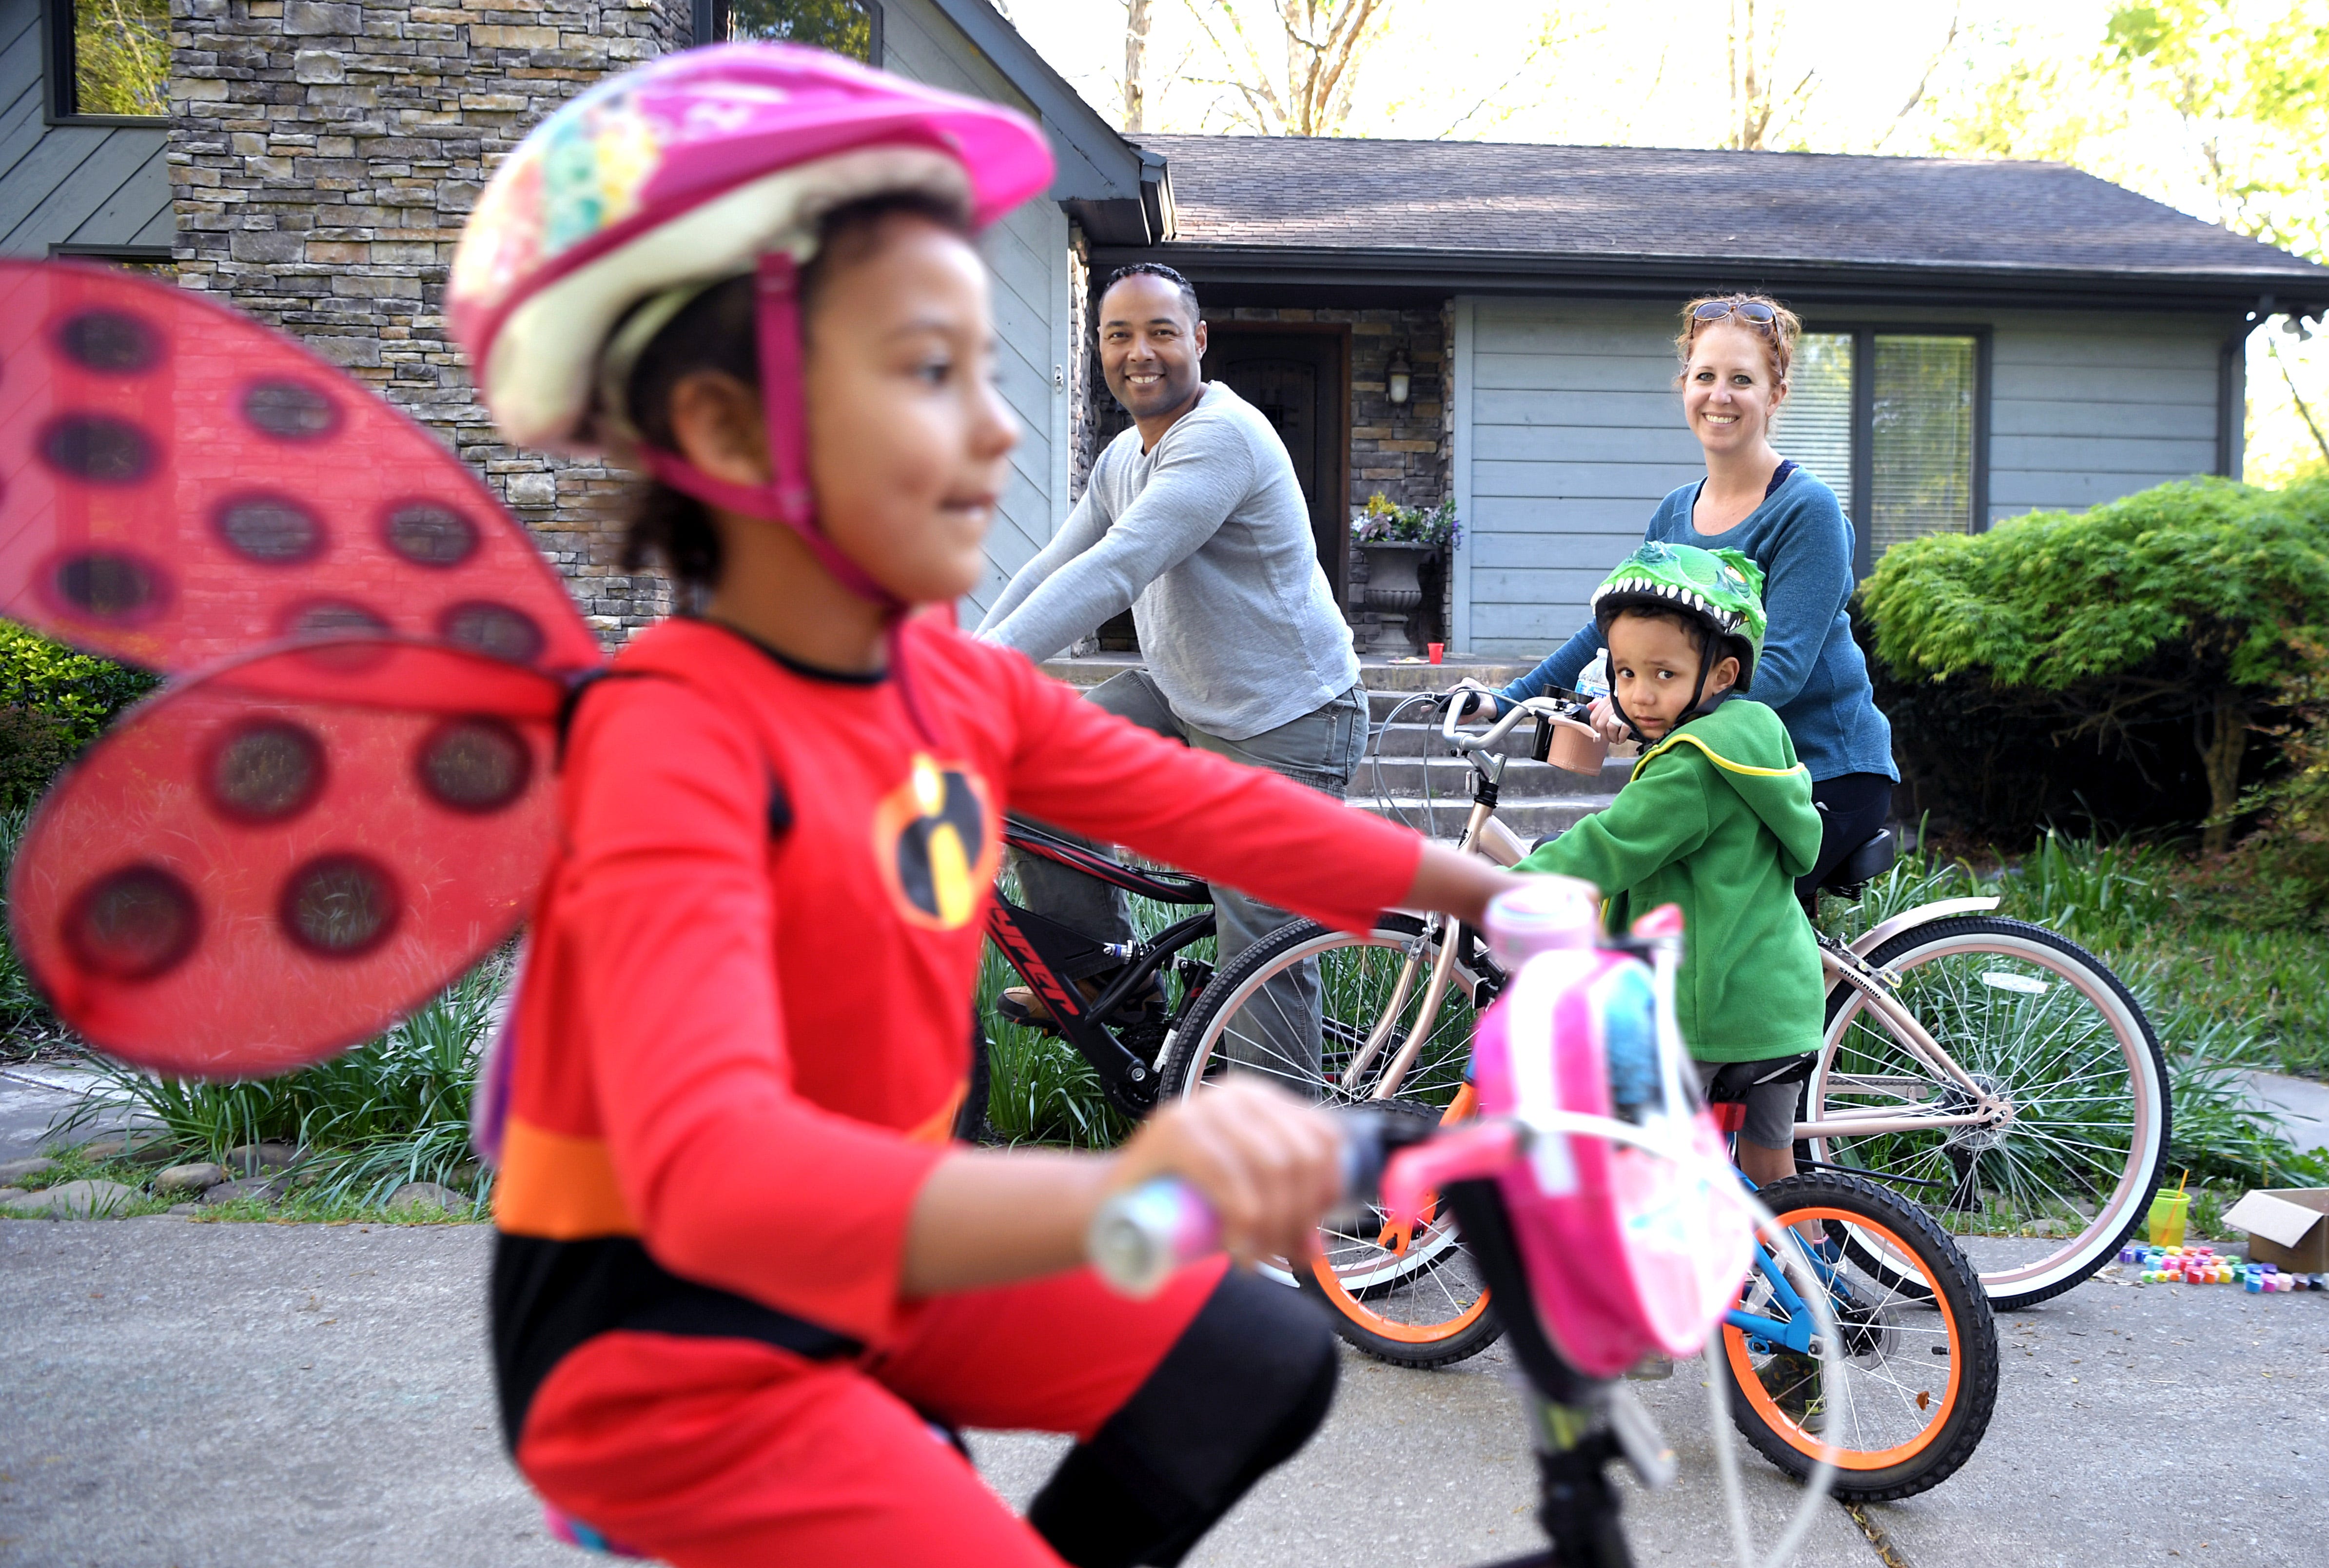 The Bell family of Leiper's Fork — Sean and Lana Bell with children Olivia and Devin — have been riding their bikes a lot since the coronavirus pandemic.